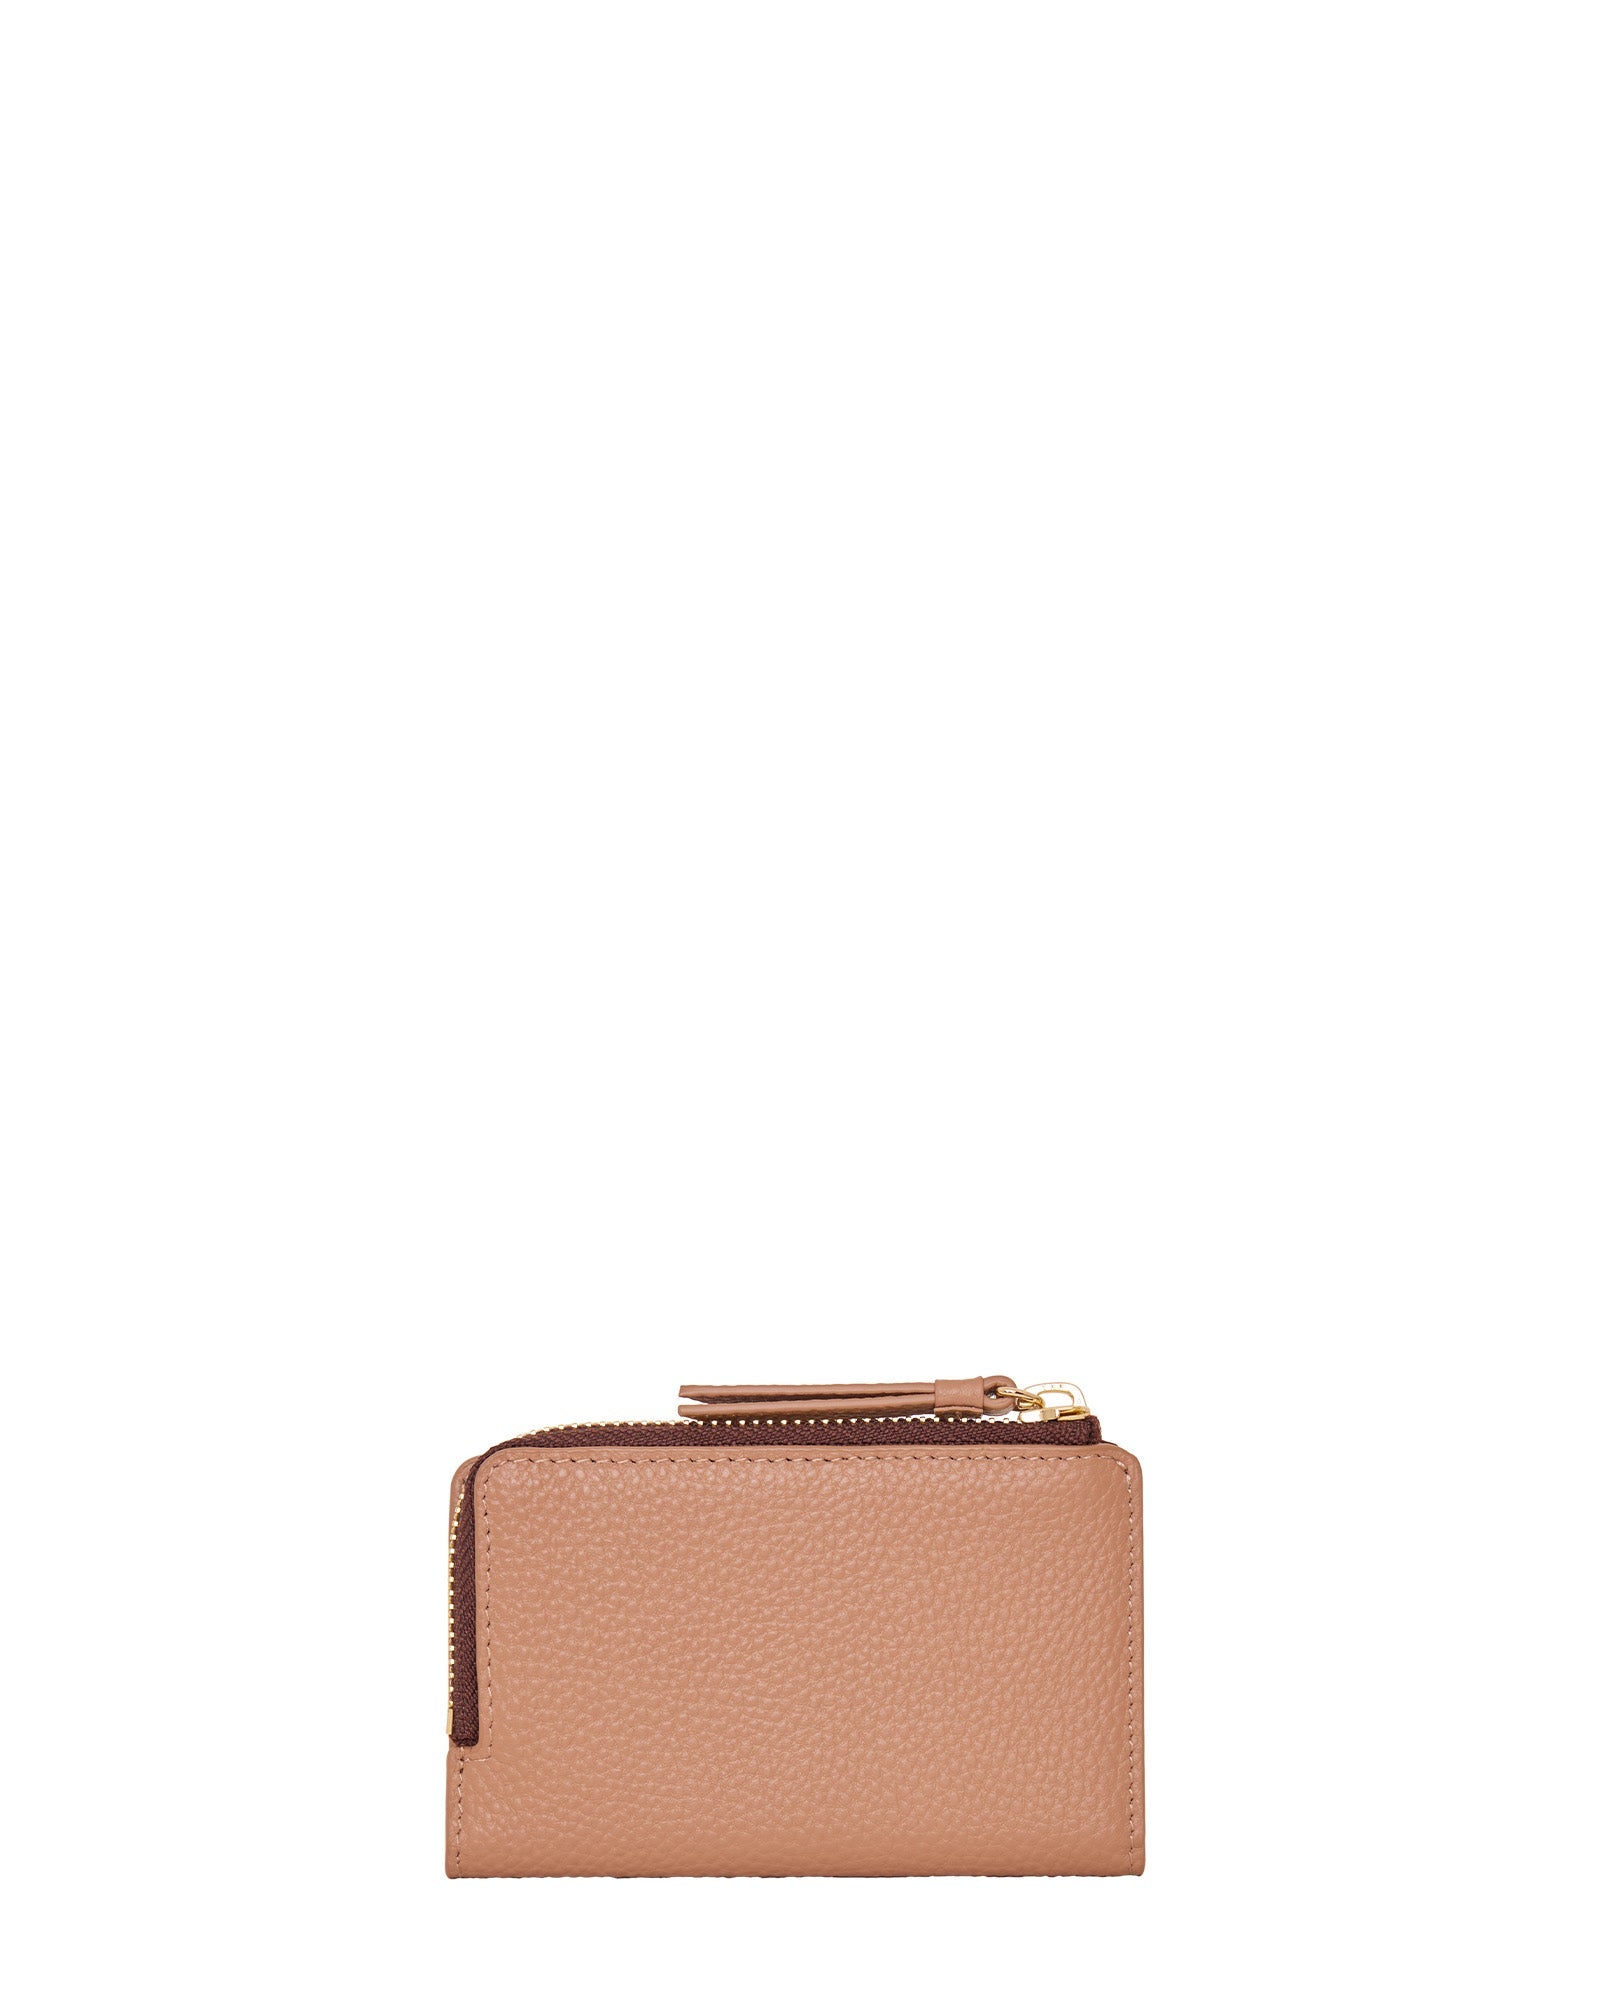 Wednesday Wallet | Taupe & White Stitch